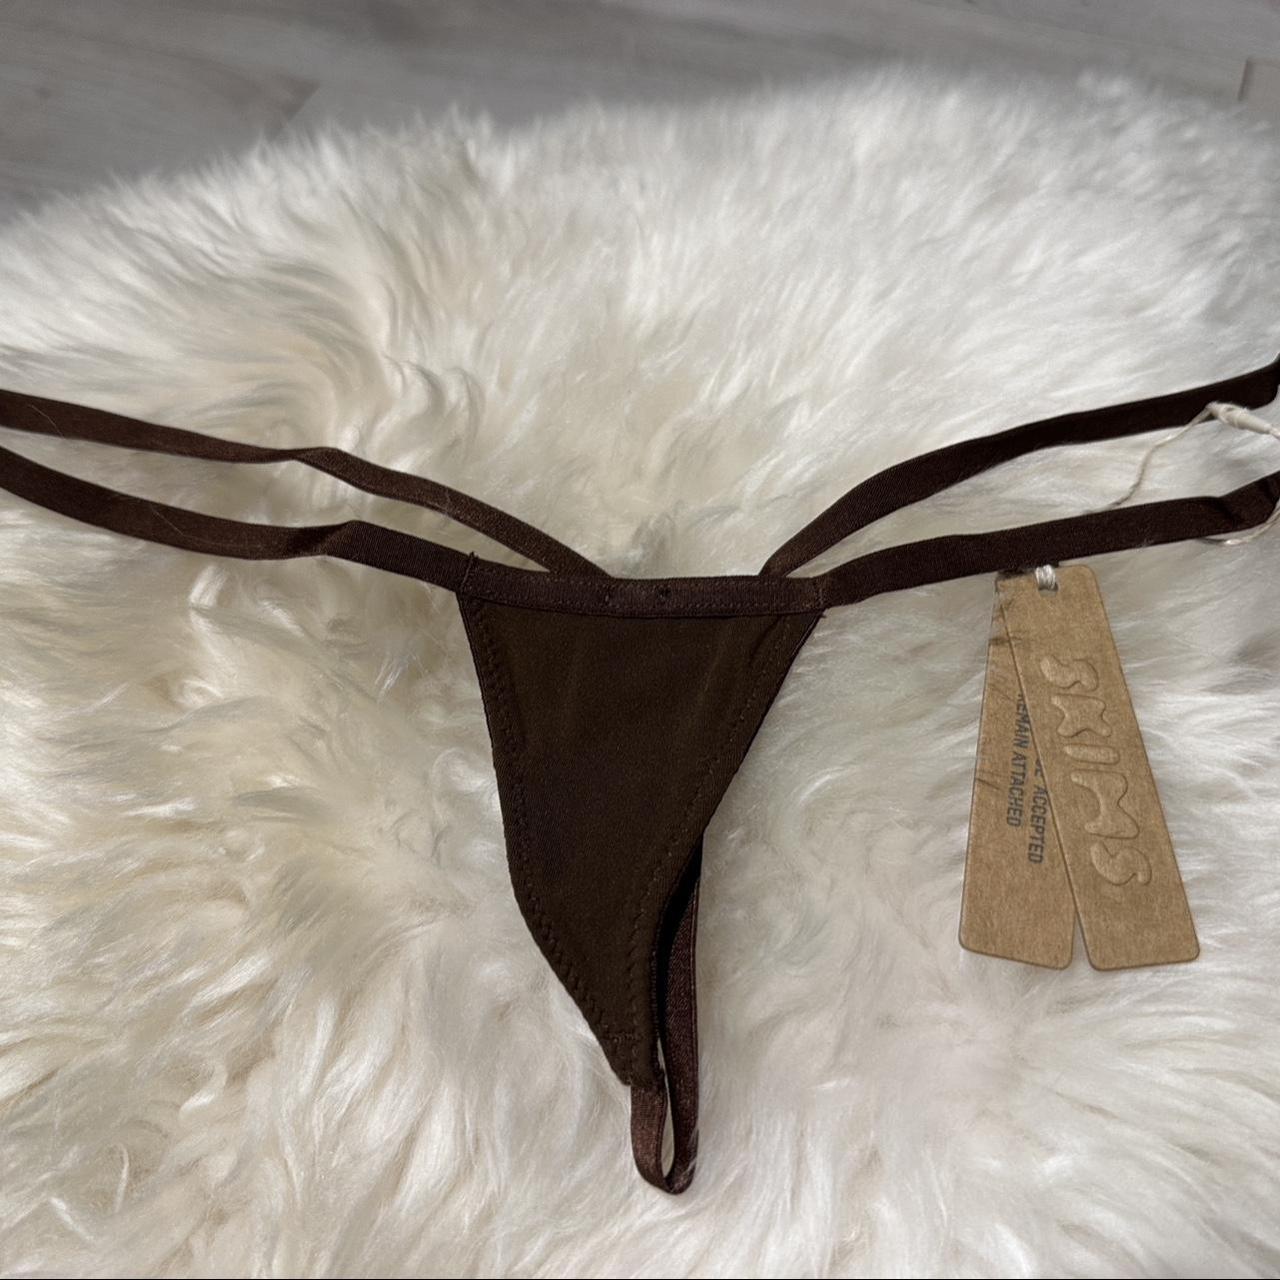 SKIMS Fits Everybody Thong - Cocoa